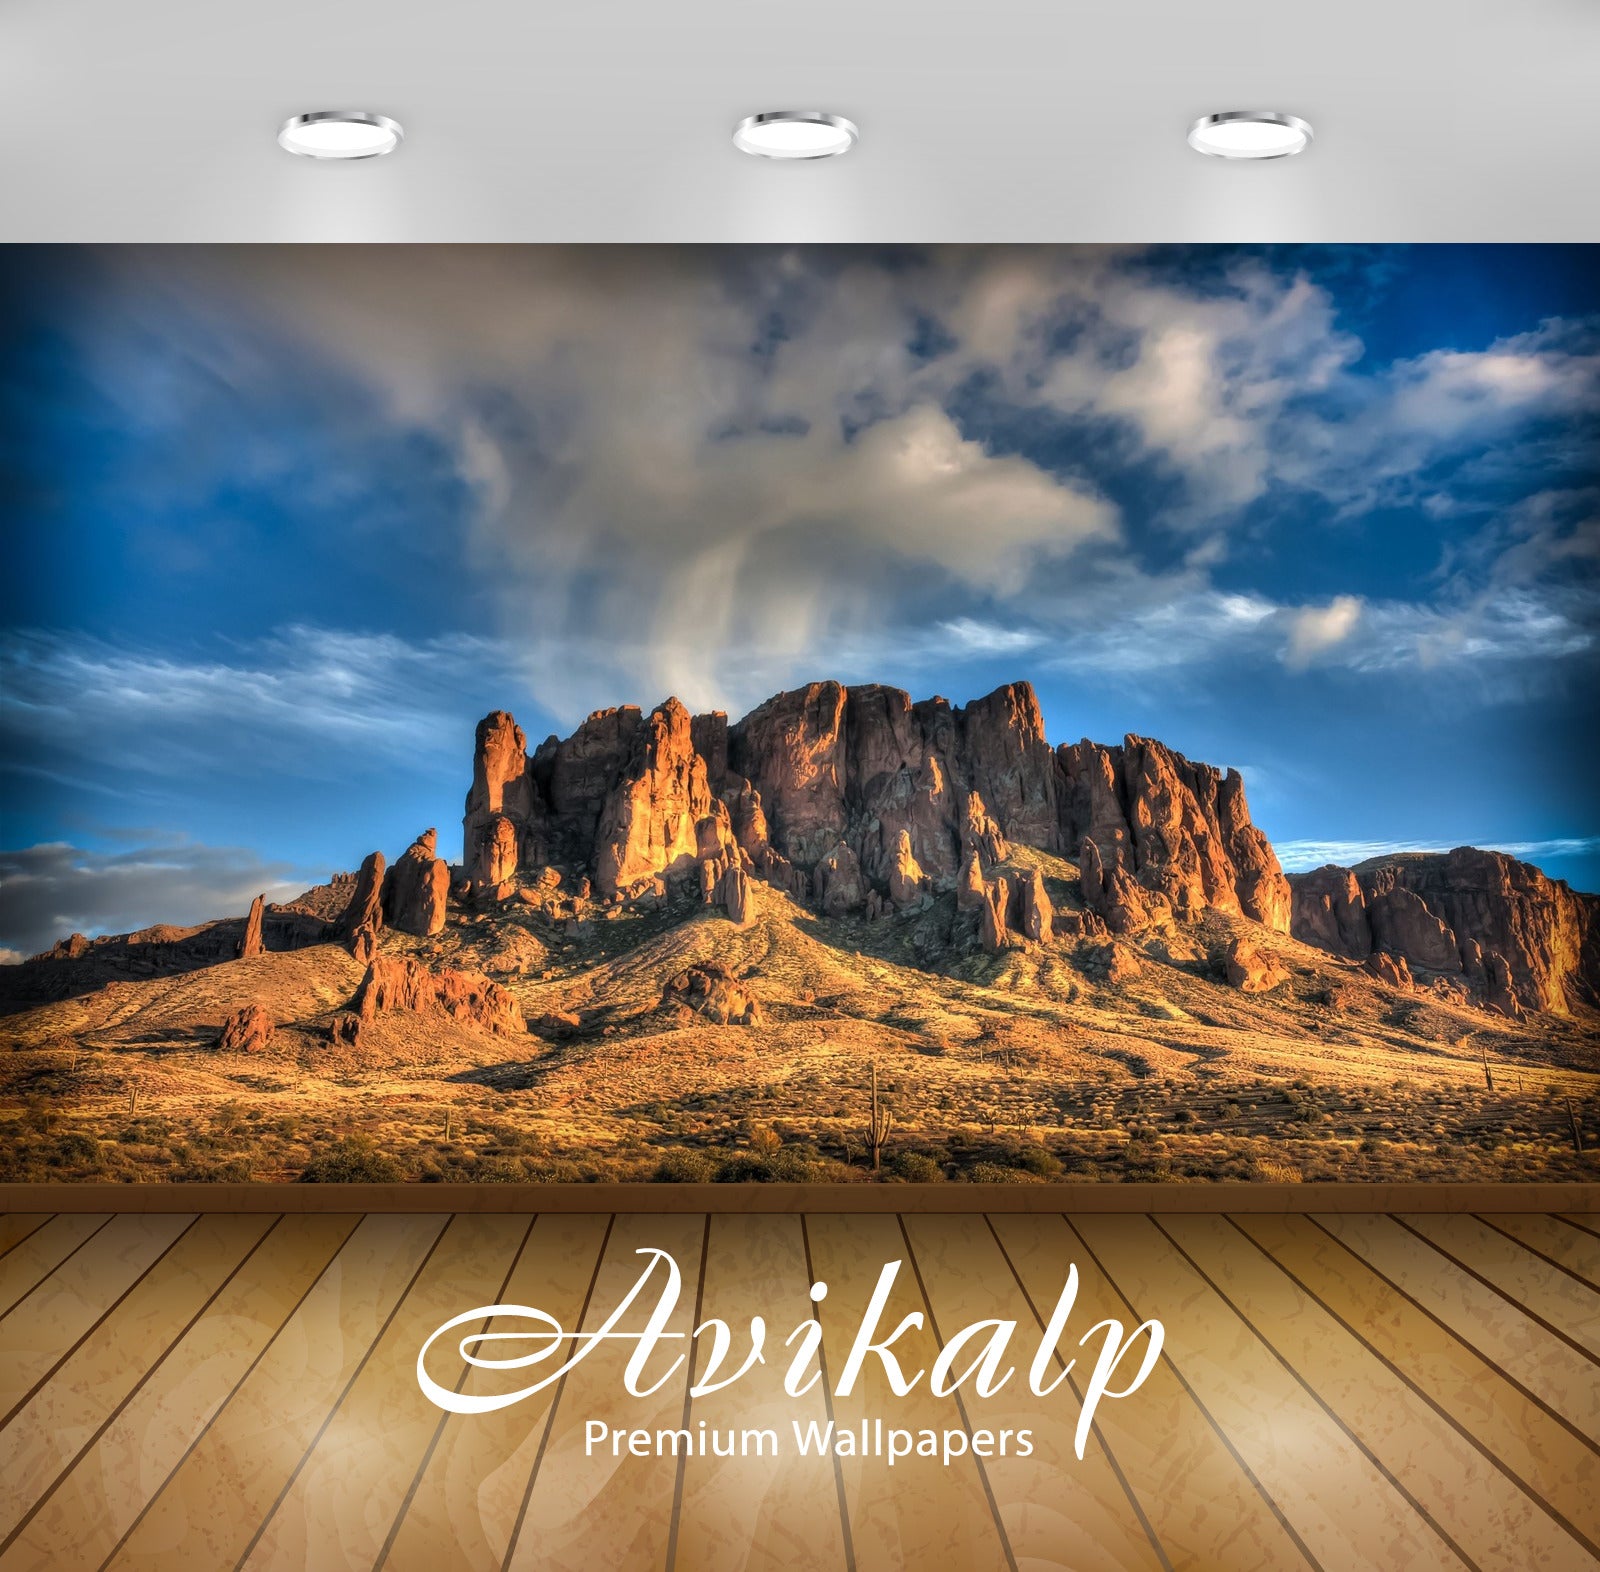 Avikalp Exclusive Awi1406 Superstition Mountains Full HD Wallpapers for Living room, Hall, Kids Room